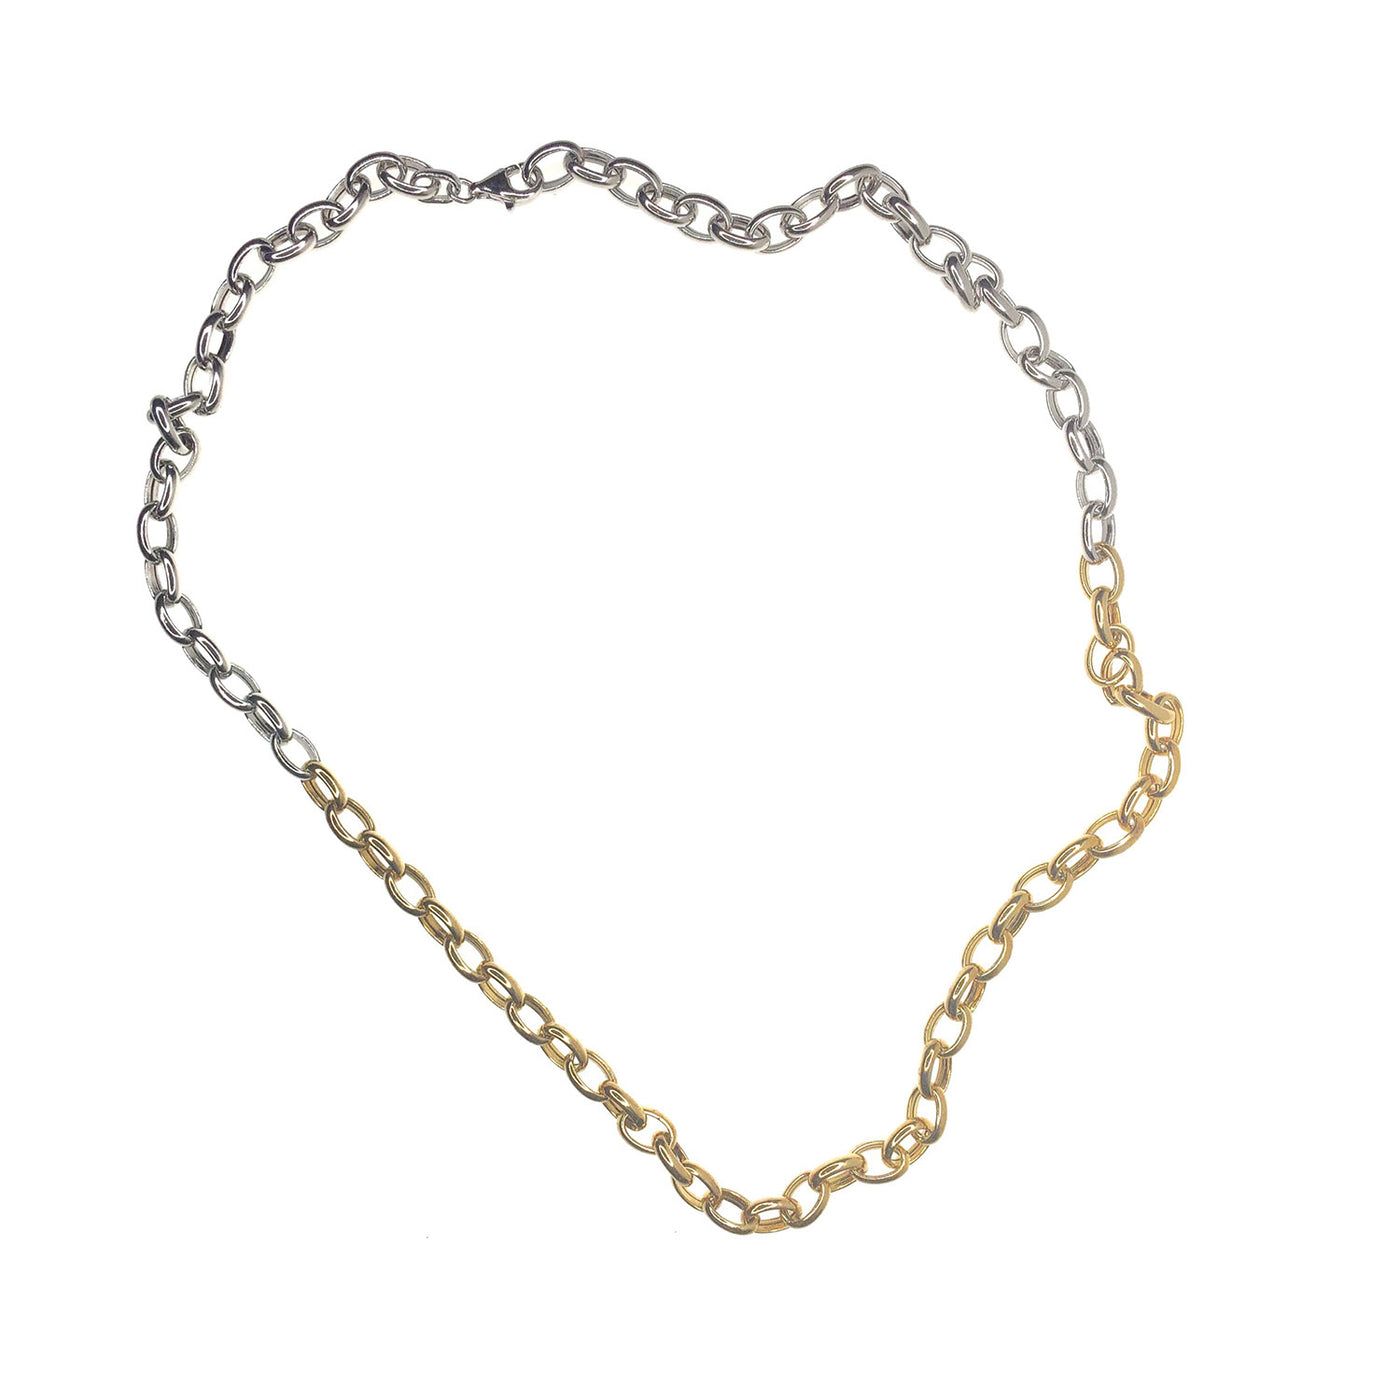 Rebecca Sloane Gold Plated Silver Large Oval Links Necklace